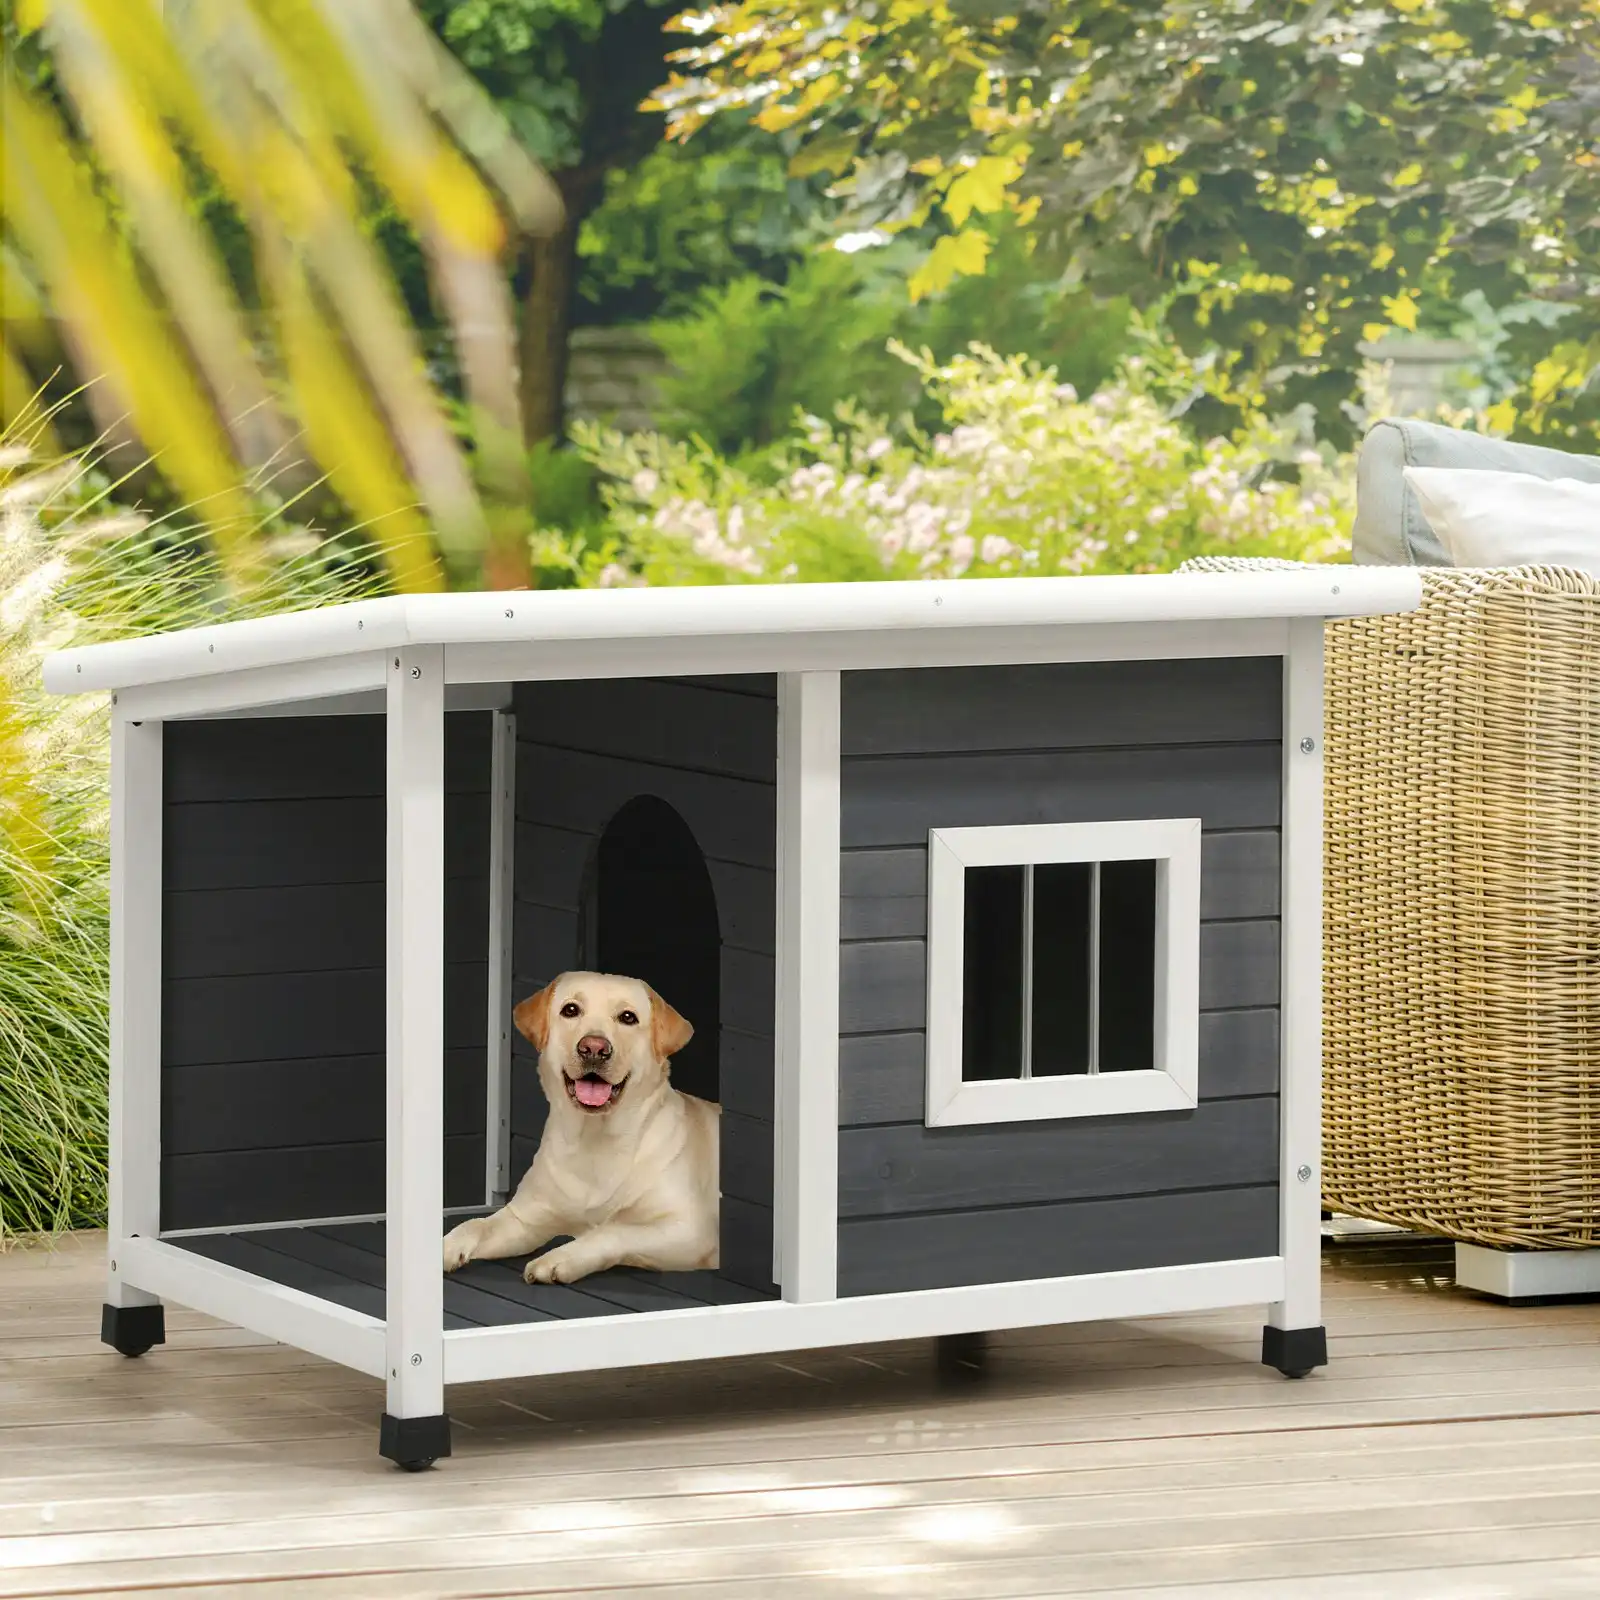 Alopet Dog Kennel House Outdoor Pet Wooden Cage Kennels Indoor Cabin Box Awning